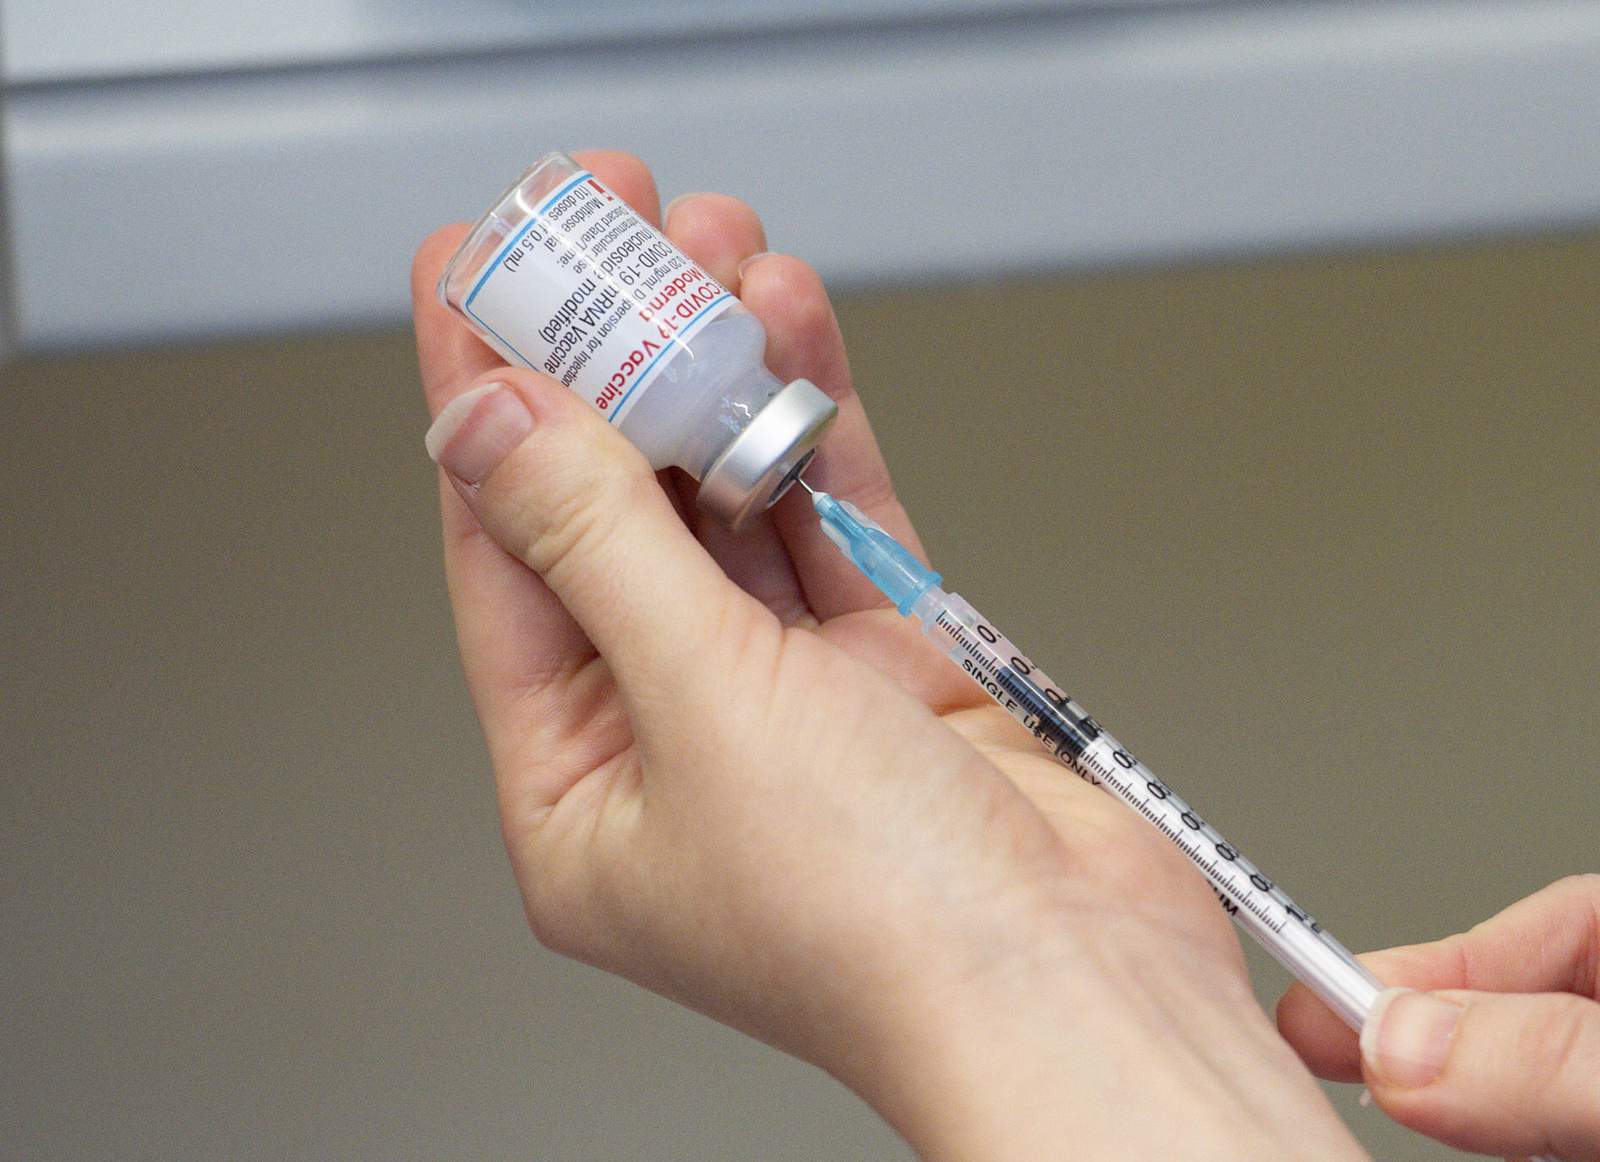 Wayne County expands COVID vaccine clinics to 17 communities: What to know